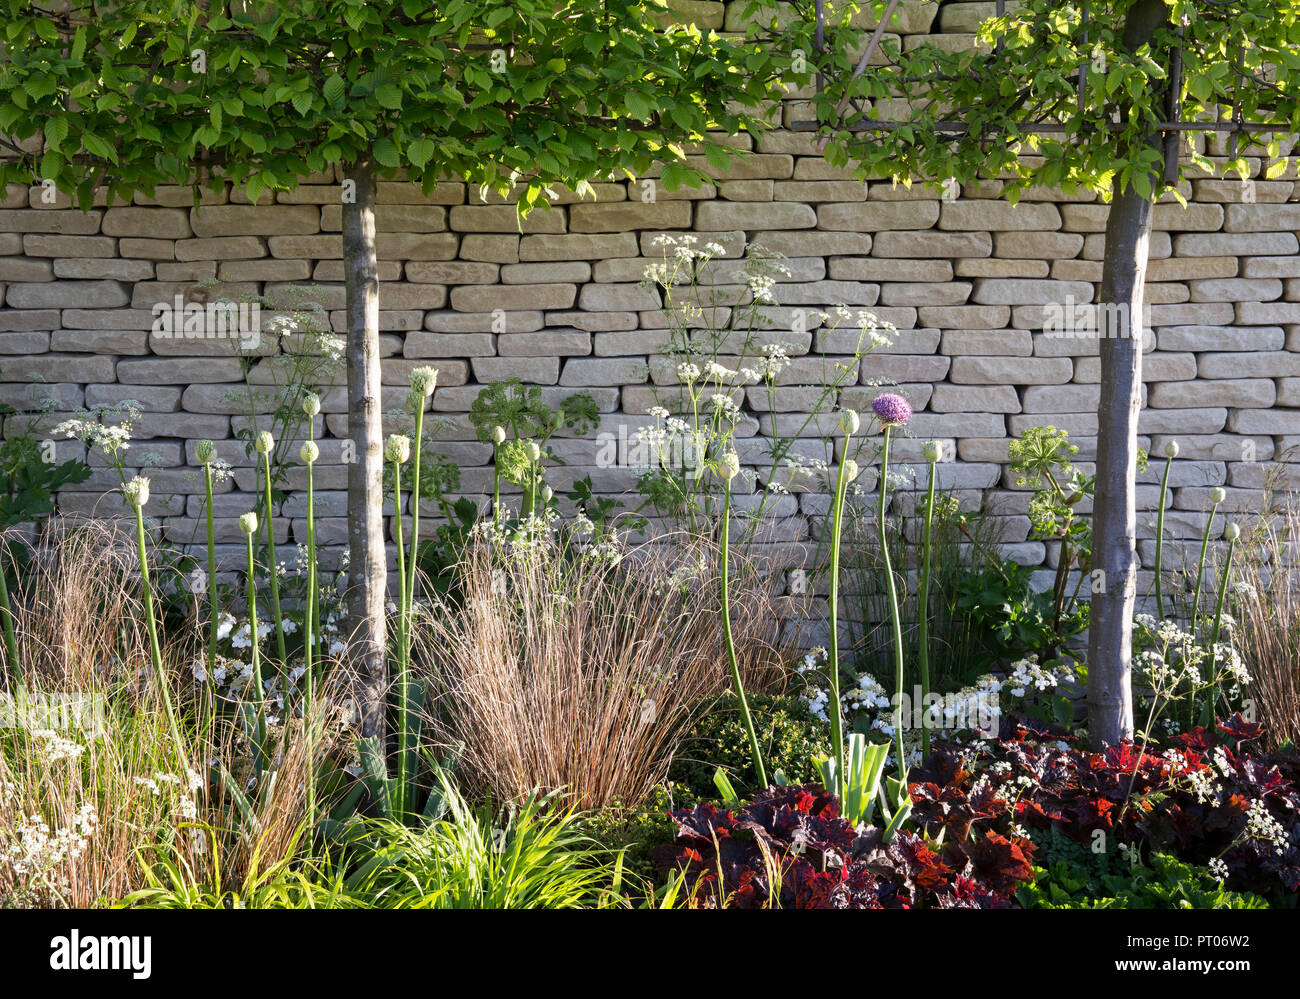 Cotswold dry stone wall, pleached Carpinus betulus trees, alliums, grasses, cow parsley, spring, Bovis Homes Family garden, RHS Malvern Spring Festiva Stock Photo